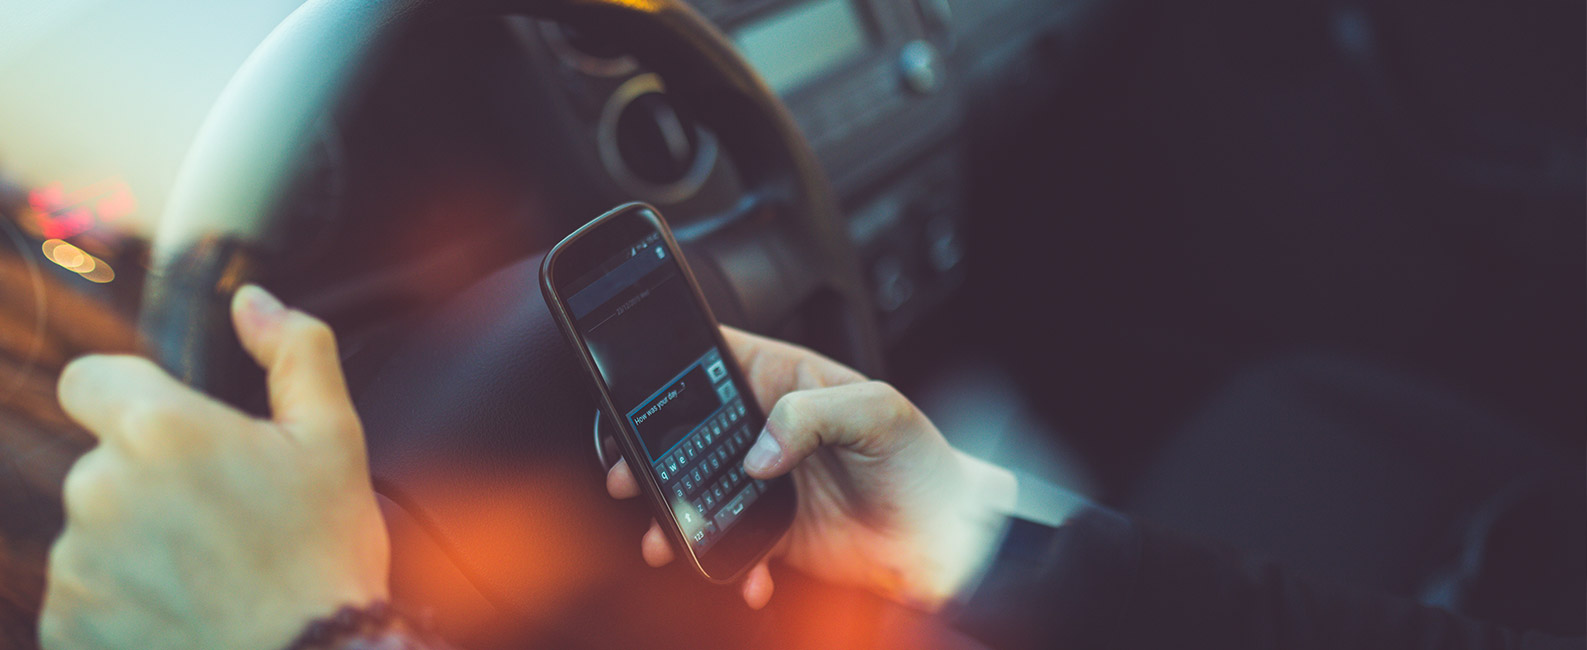 Driving while using a phone|Driving while Distracted